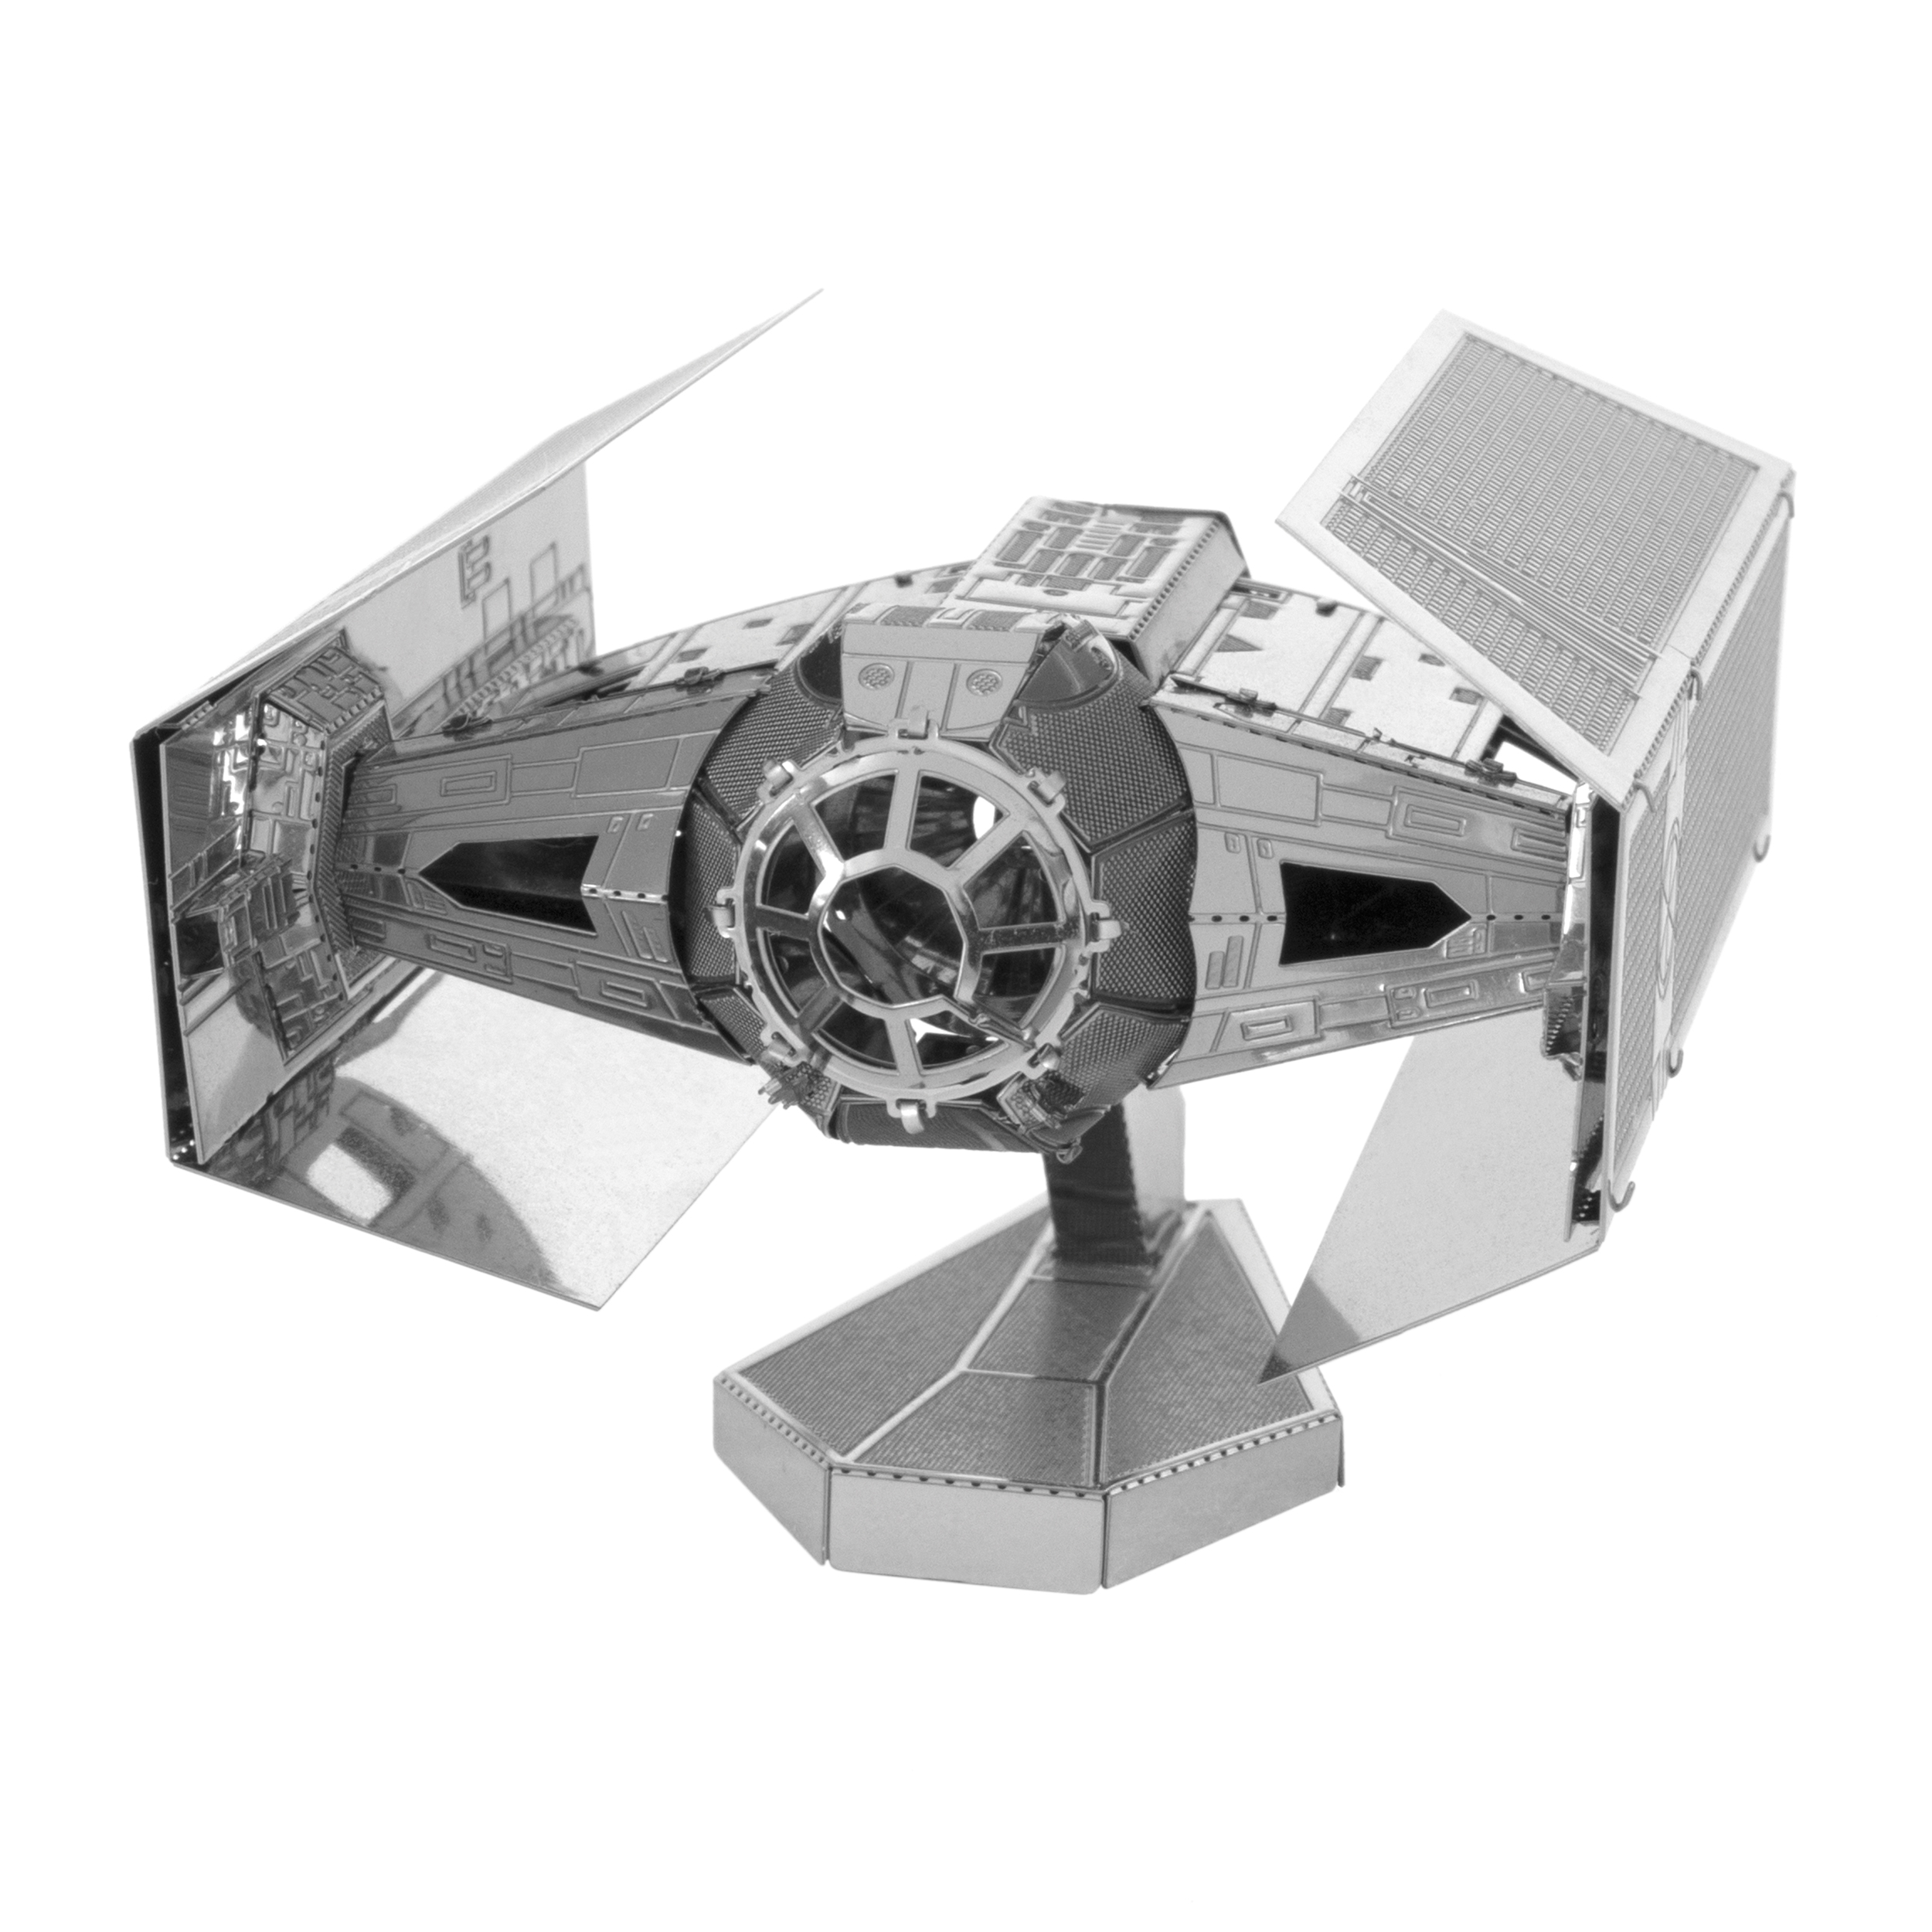 Fascinations Toys & Gifts Metal Earth 3D Laser Cut Model - Star Wars: Darth Vader's TIE Fighter